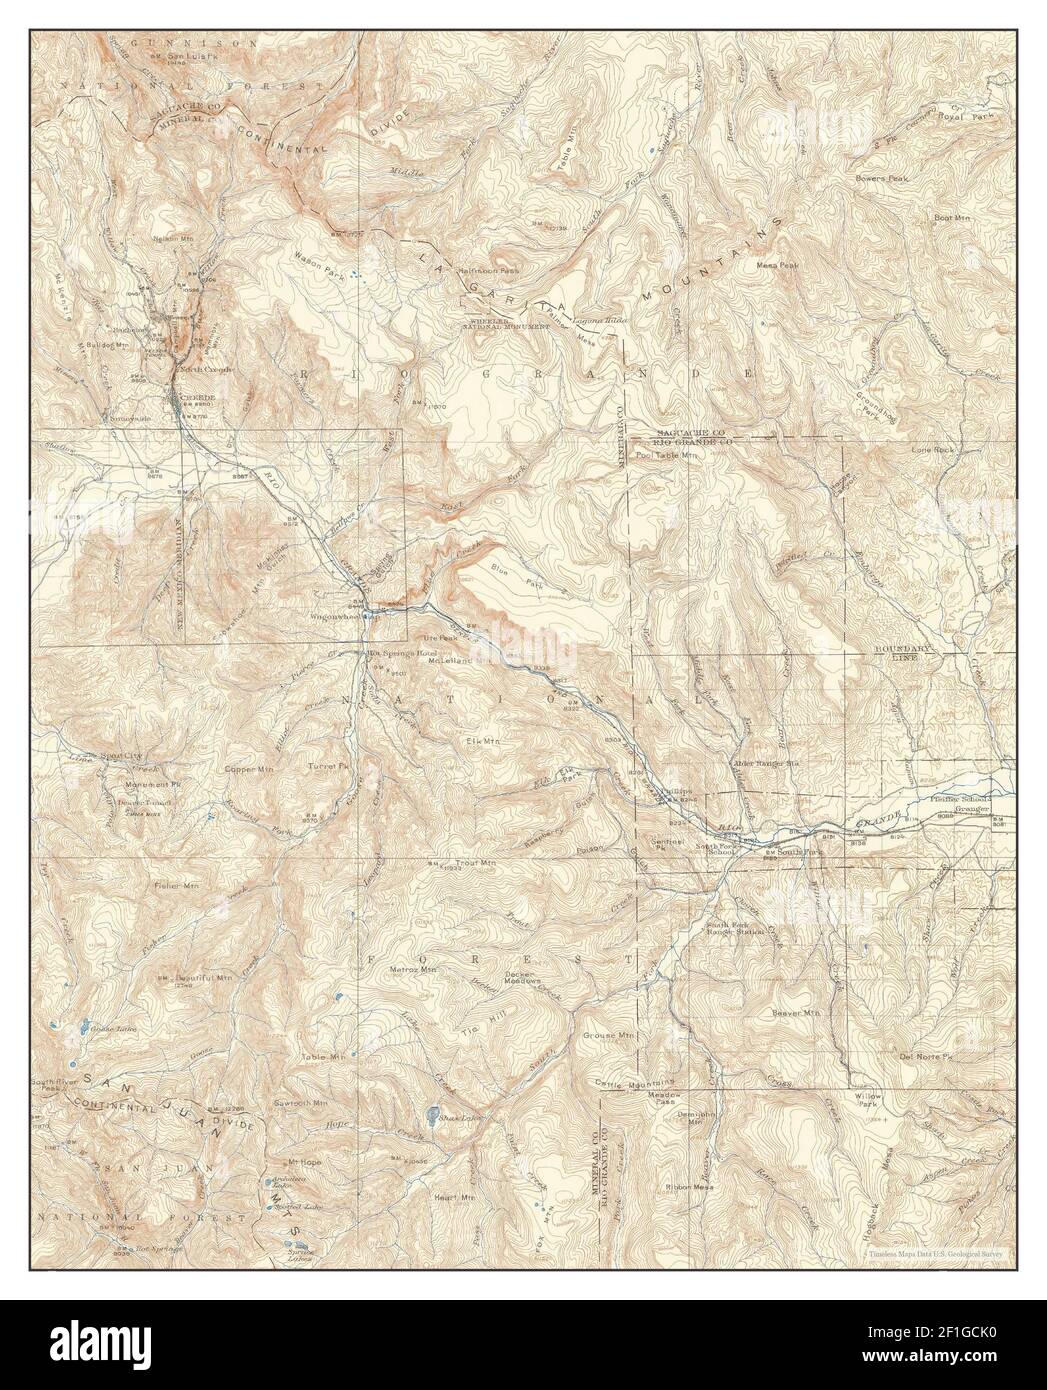 Creede, Colorado, map 1914, 1:125000, United States of America by Timeless Maps, data U.S. Geological Survey Stock Photo